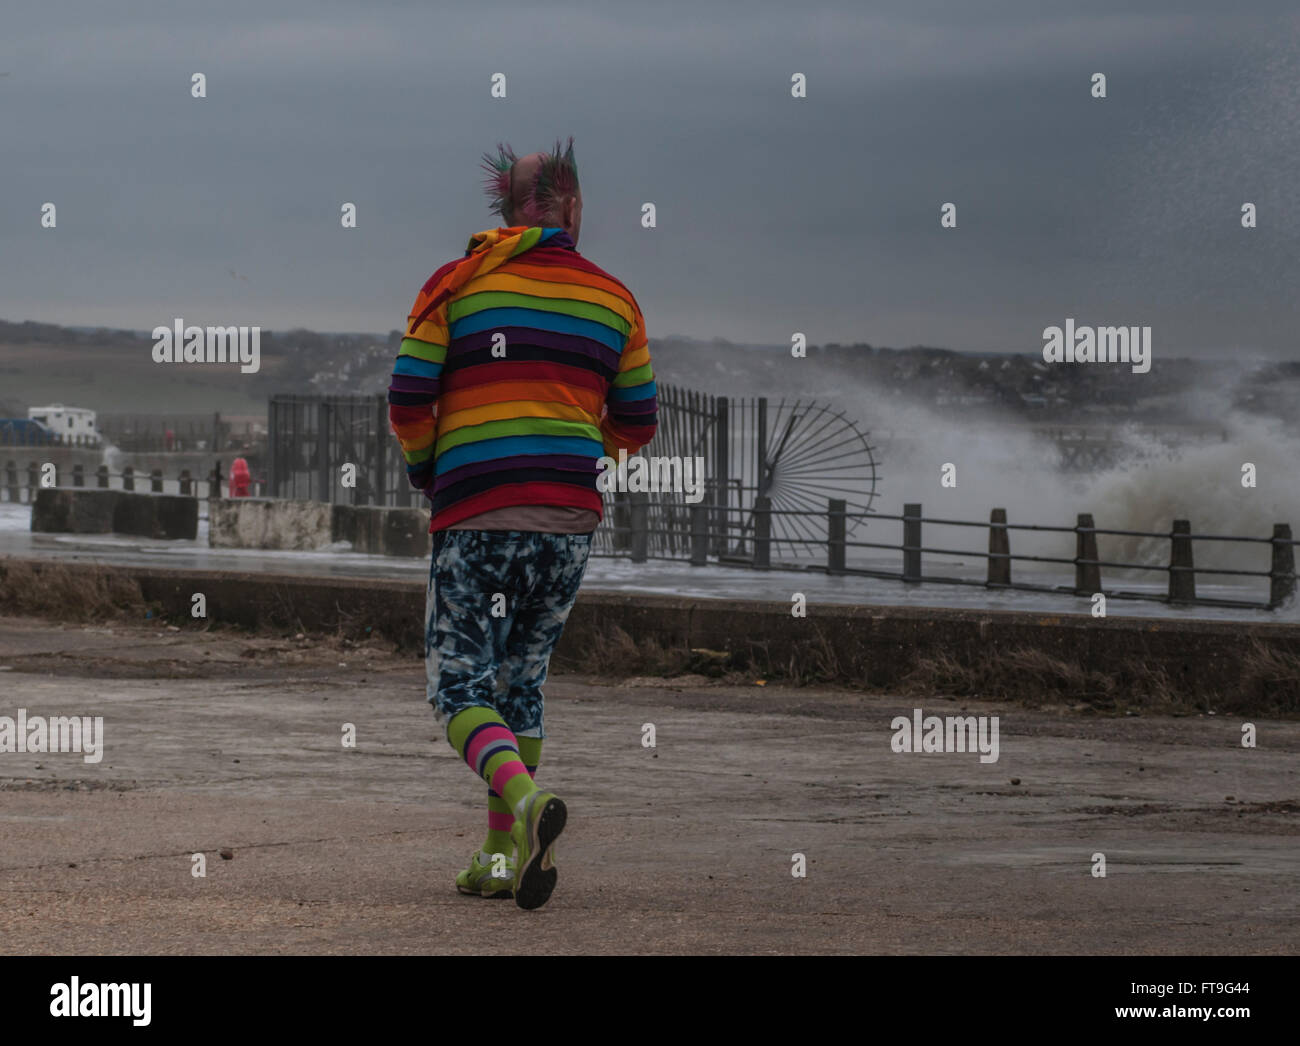 Newhaven, East Sussex, UK.26 March 2016.Storm force wind from the South whips up the sea in harbour entrance. Colourful character brightens the scene . Stock Photo